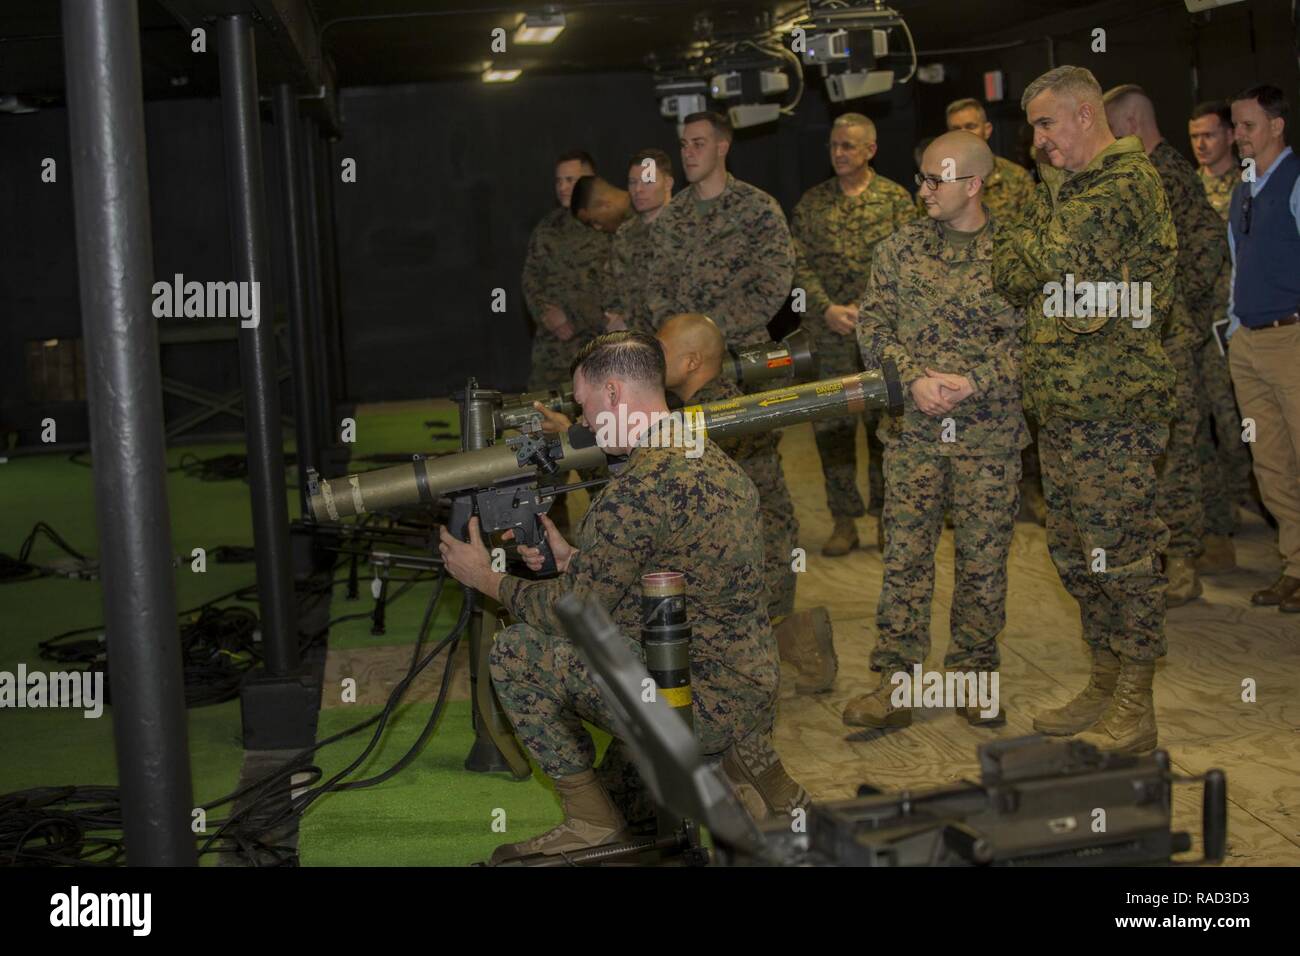 U.S. Marine Corps Gen. Glenn Walters, right, the Assistant Commandant of the Marine Corps observes Marines training on simulator training systems during a visit to Camp Lejeune, N.C., Jan. 27, 2017. The purpose of the visit was to increase awareness and capabilities of ground simulation and simulator training systems in support of operational forces combat readiness. Stock Photo